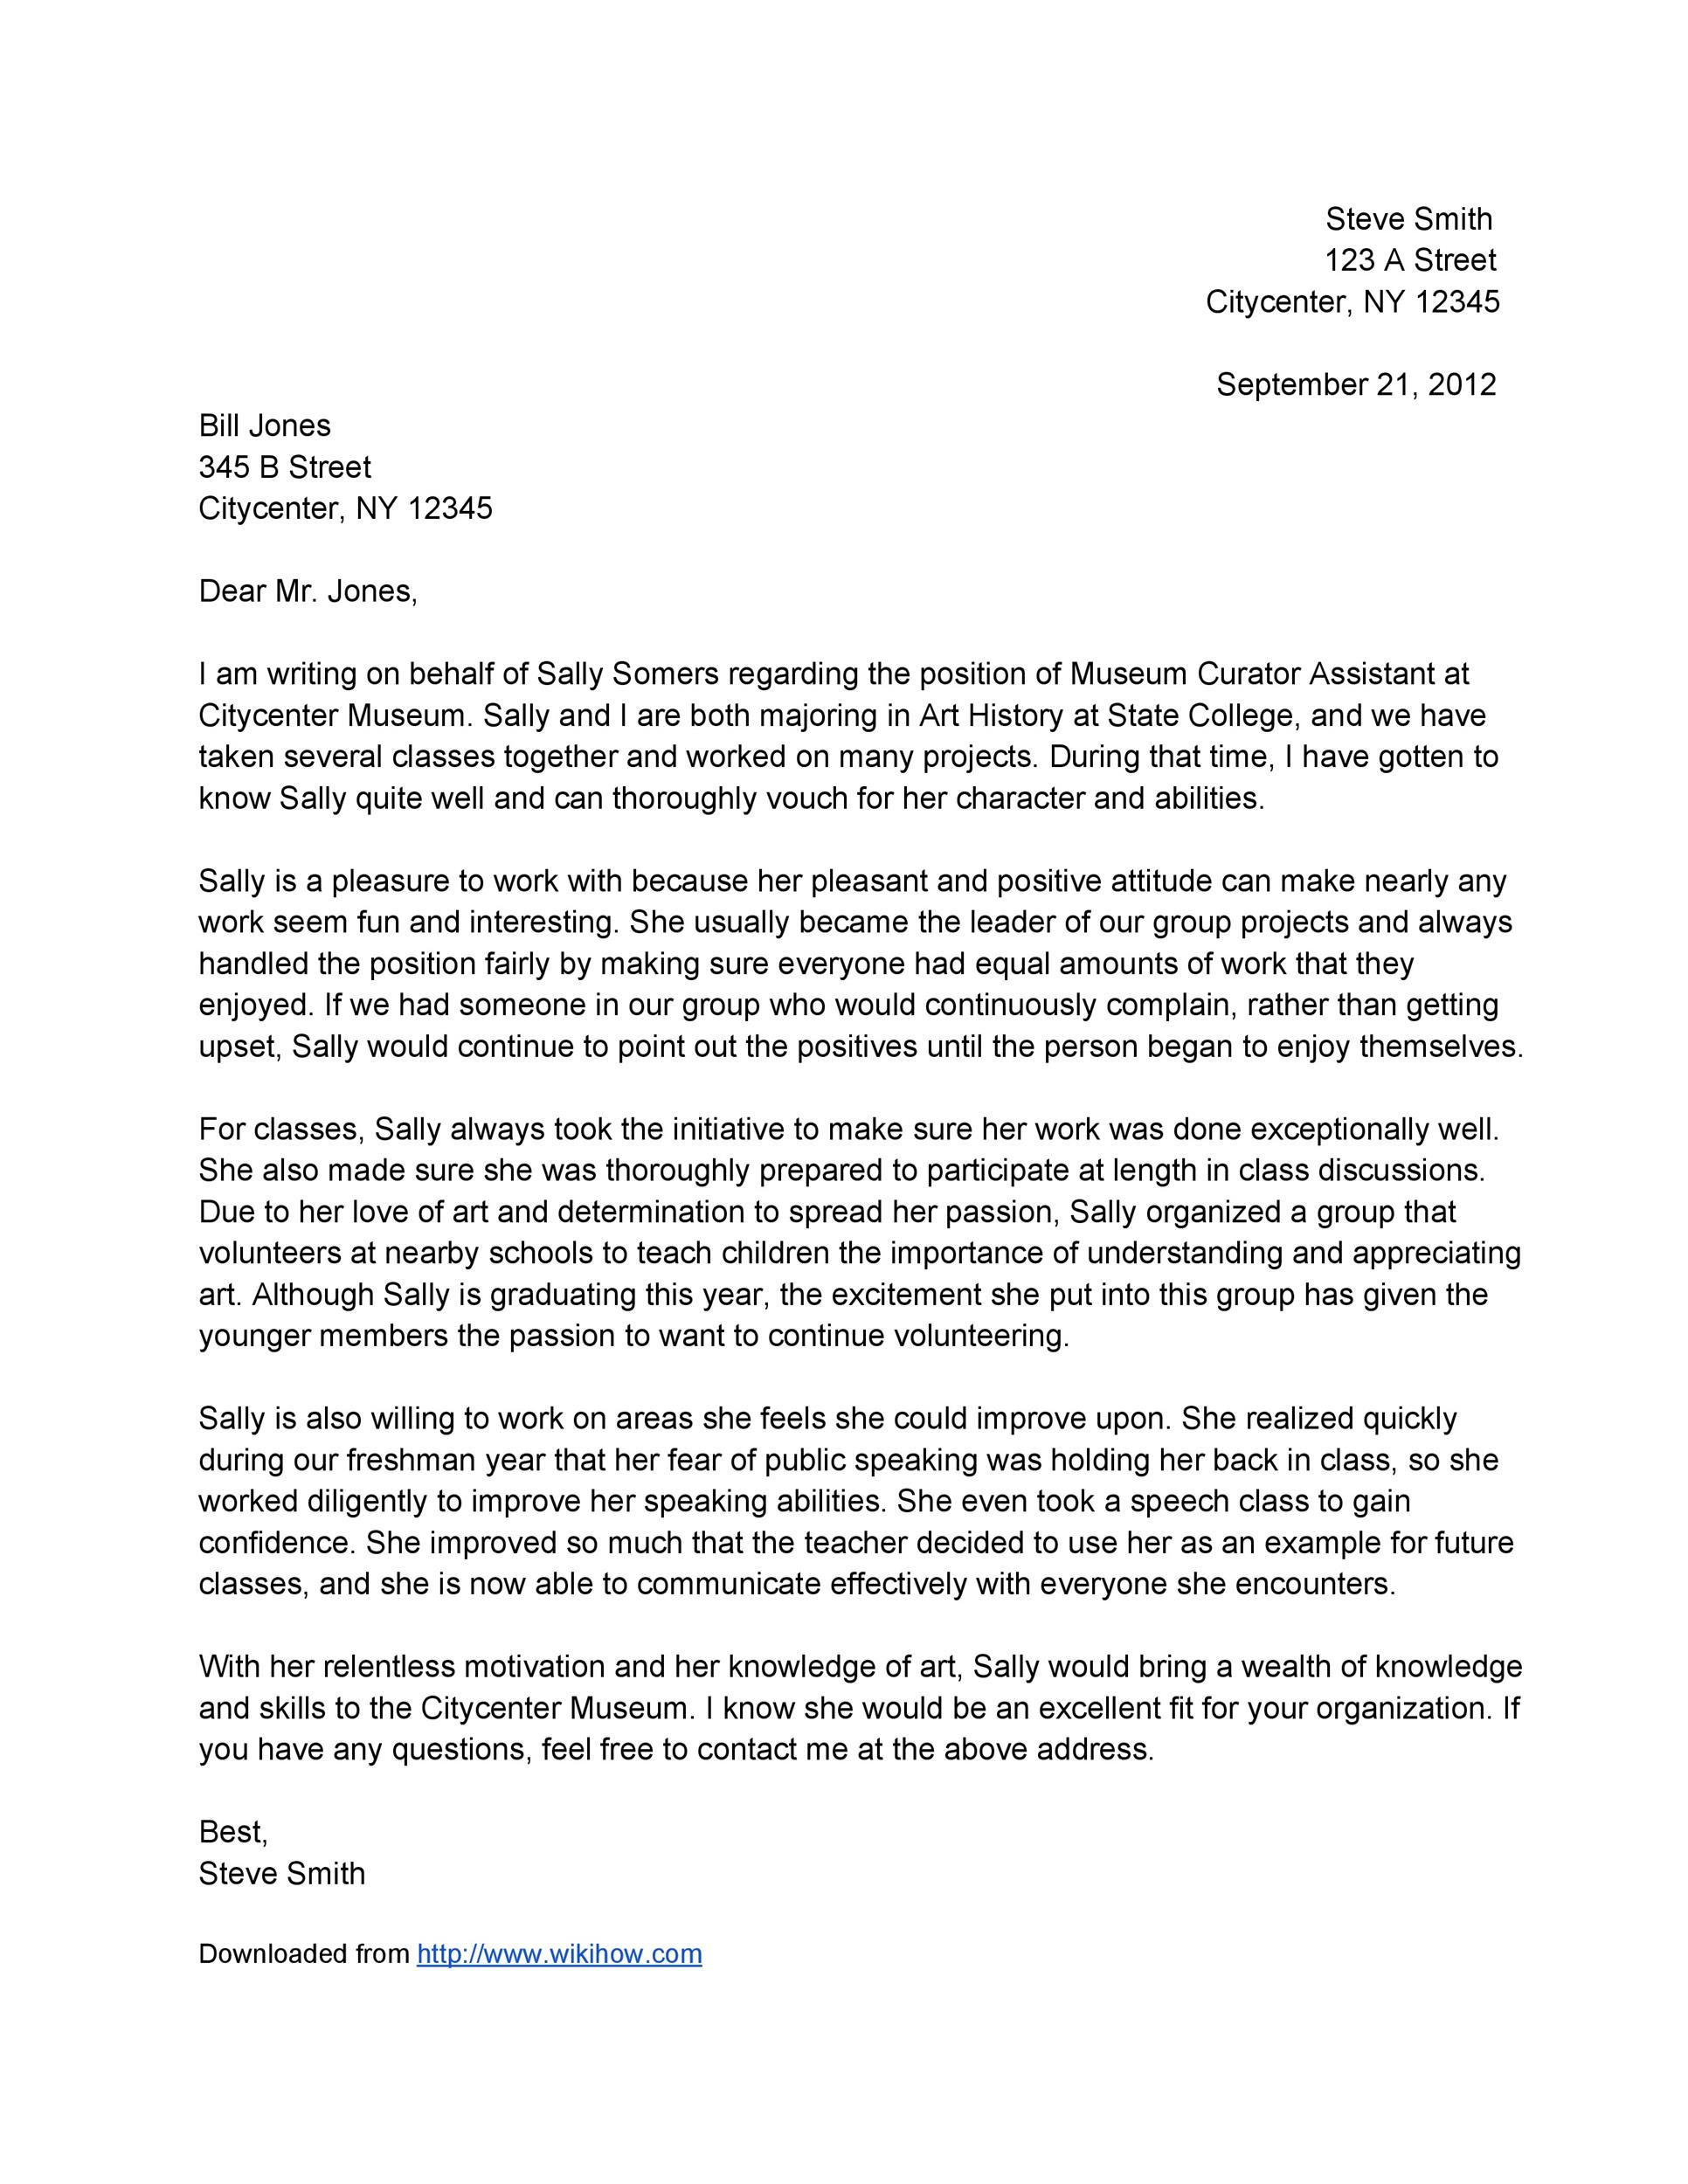 Great Letter Of Recommendation Sample from templatelab.com